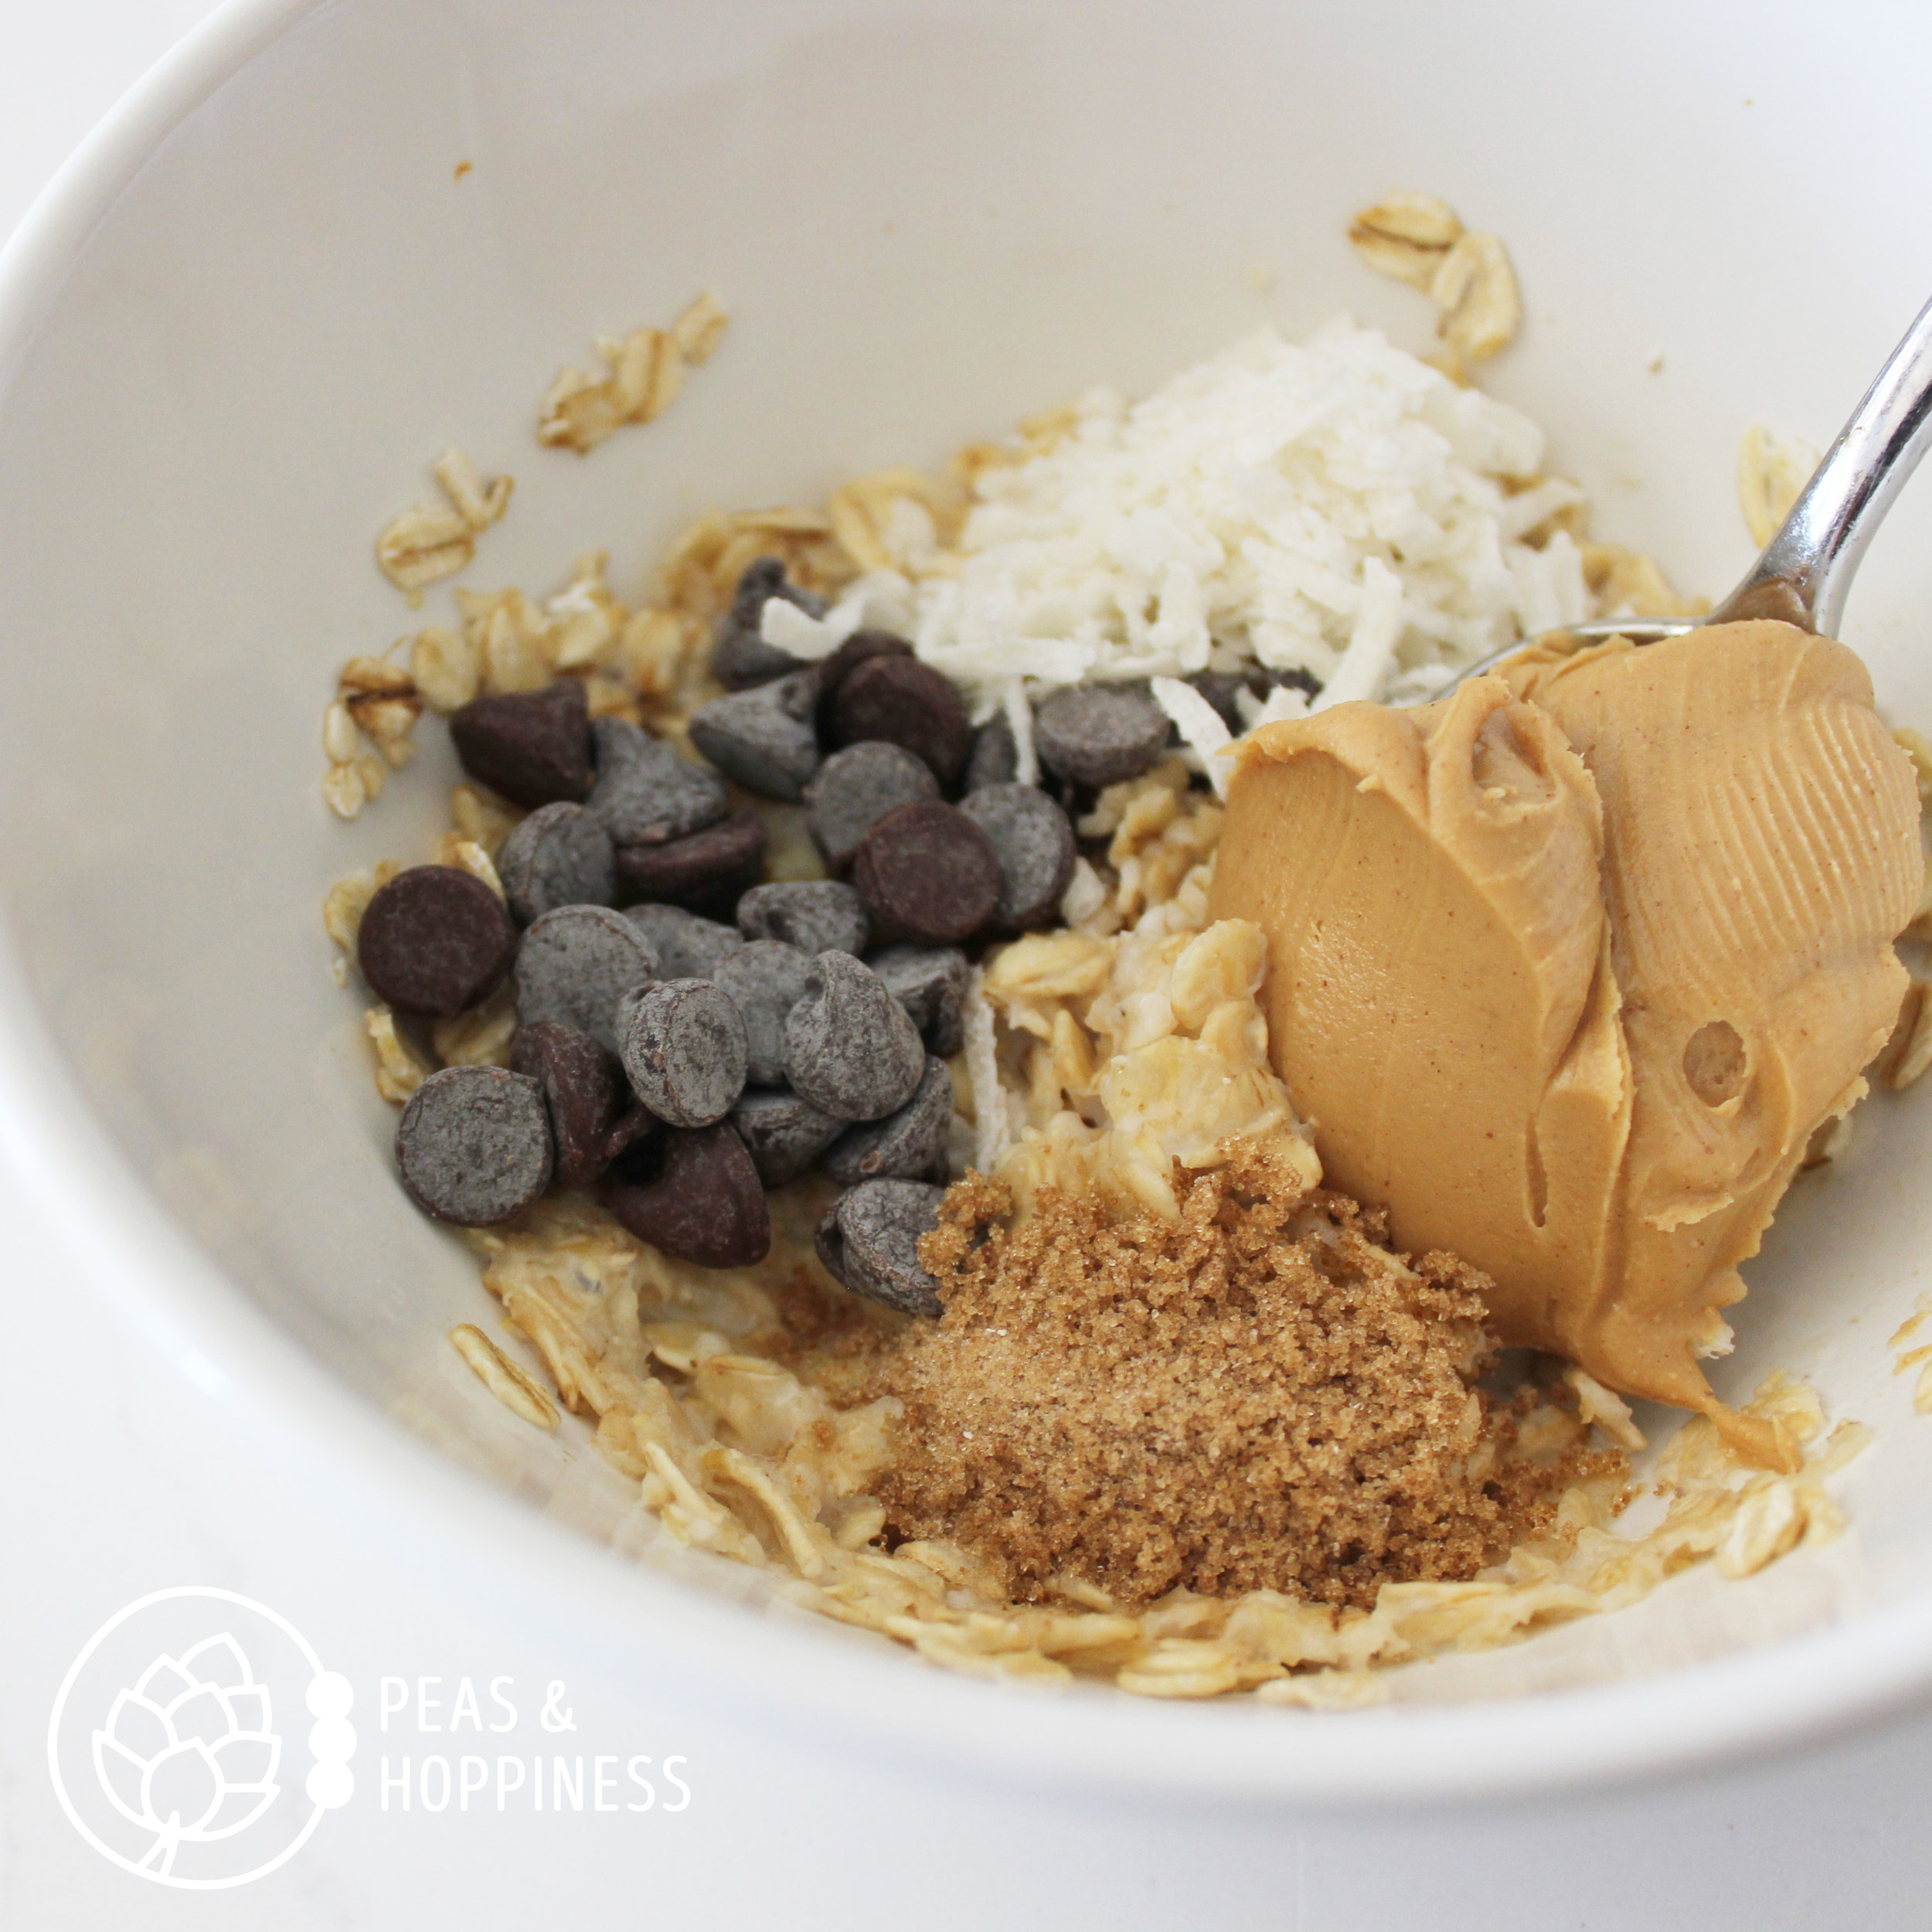 Chocolate Peanut Butter Oatmeal by Peas & Hoppiness - www.peasandhoppiness.com